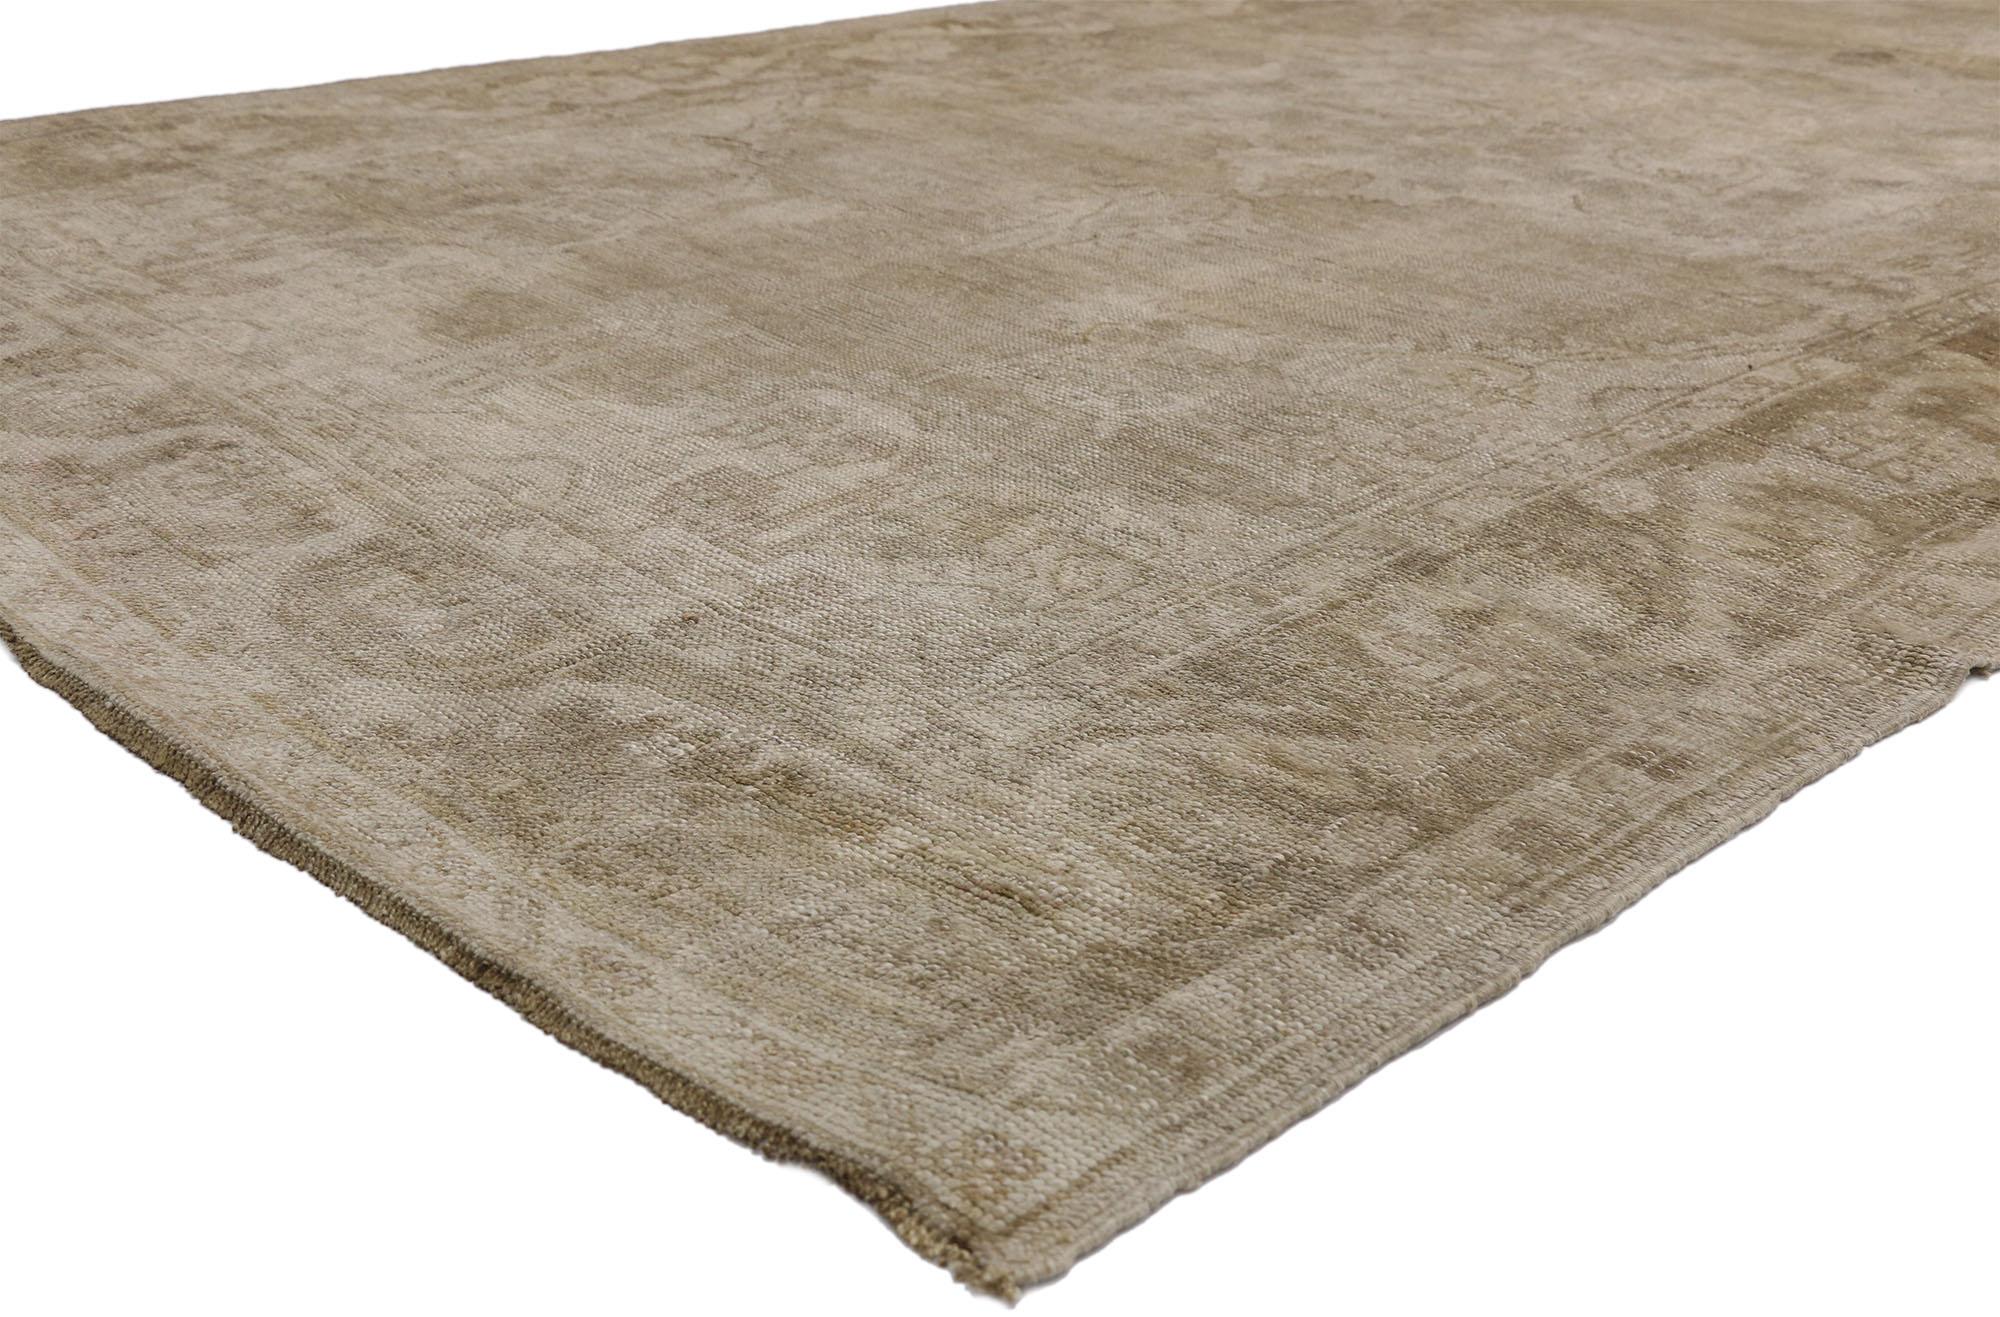 52484 vintage Turkish Oushak rug with Mission style and French Romanticism. Featuring an intimate patina with generous authentic abrash gradations, this hand knotted wool vintage Turkish Oushak rug with Mission style recalls a bygone era of romance,